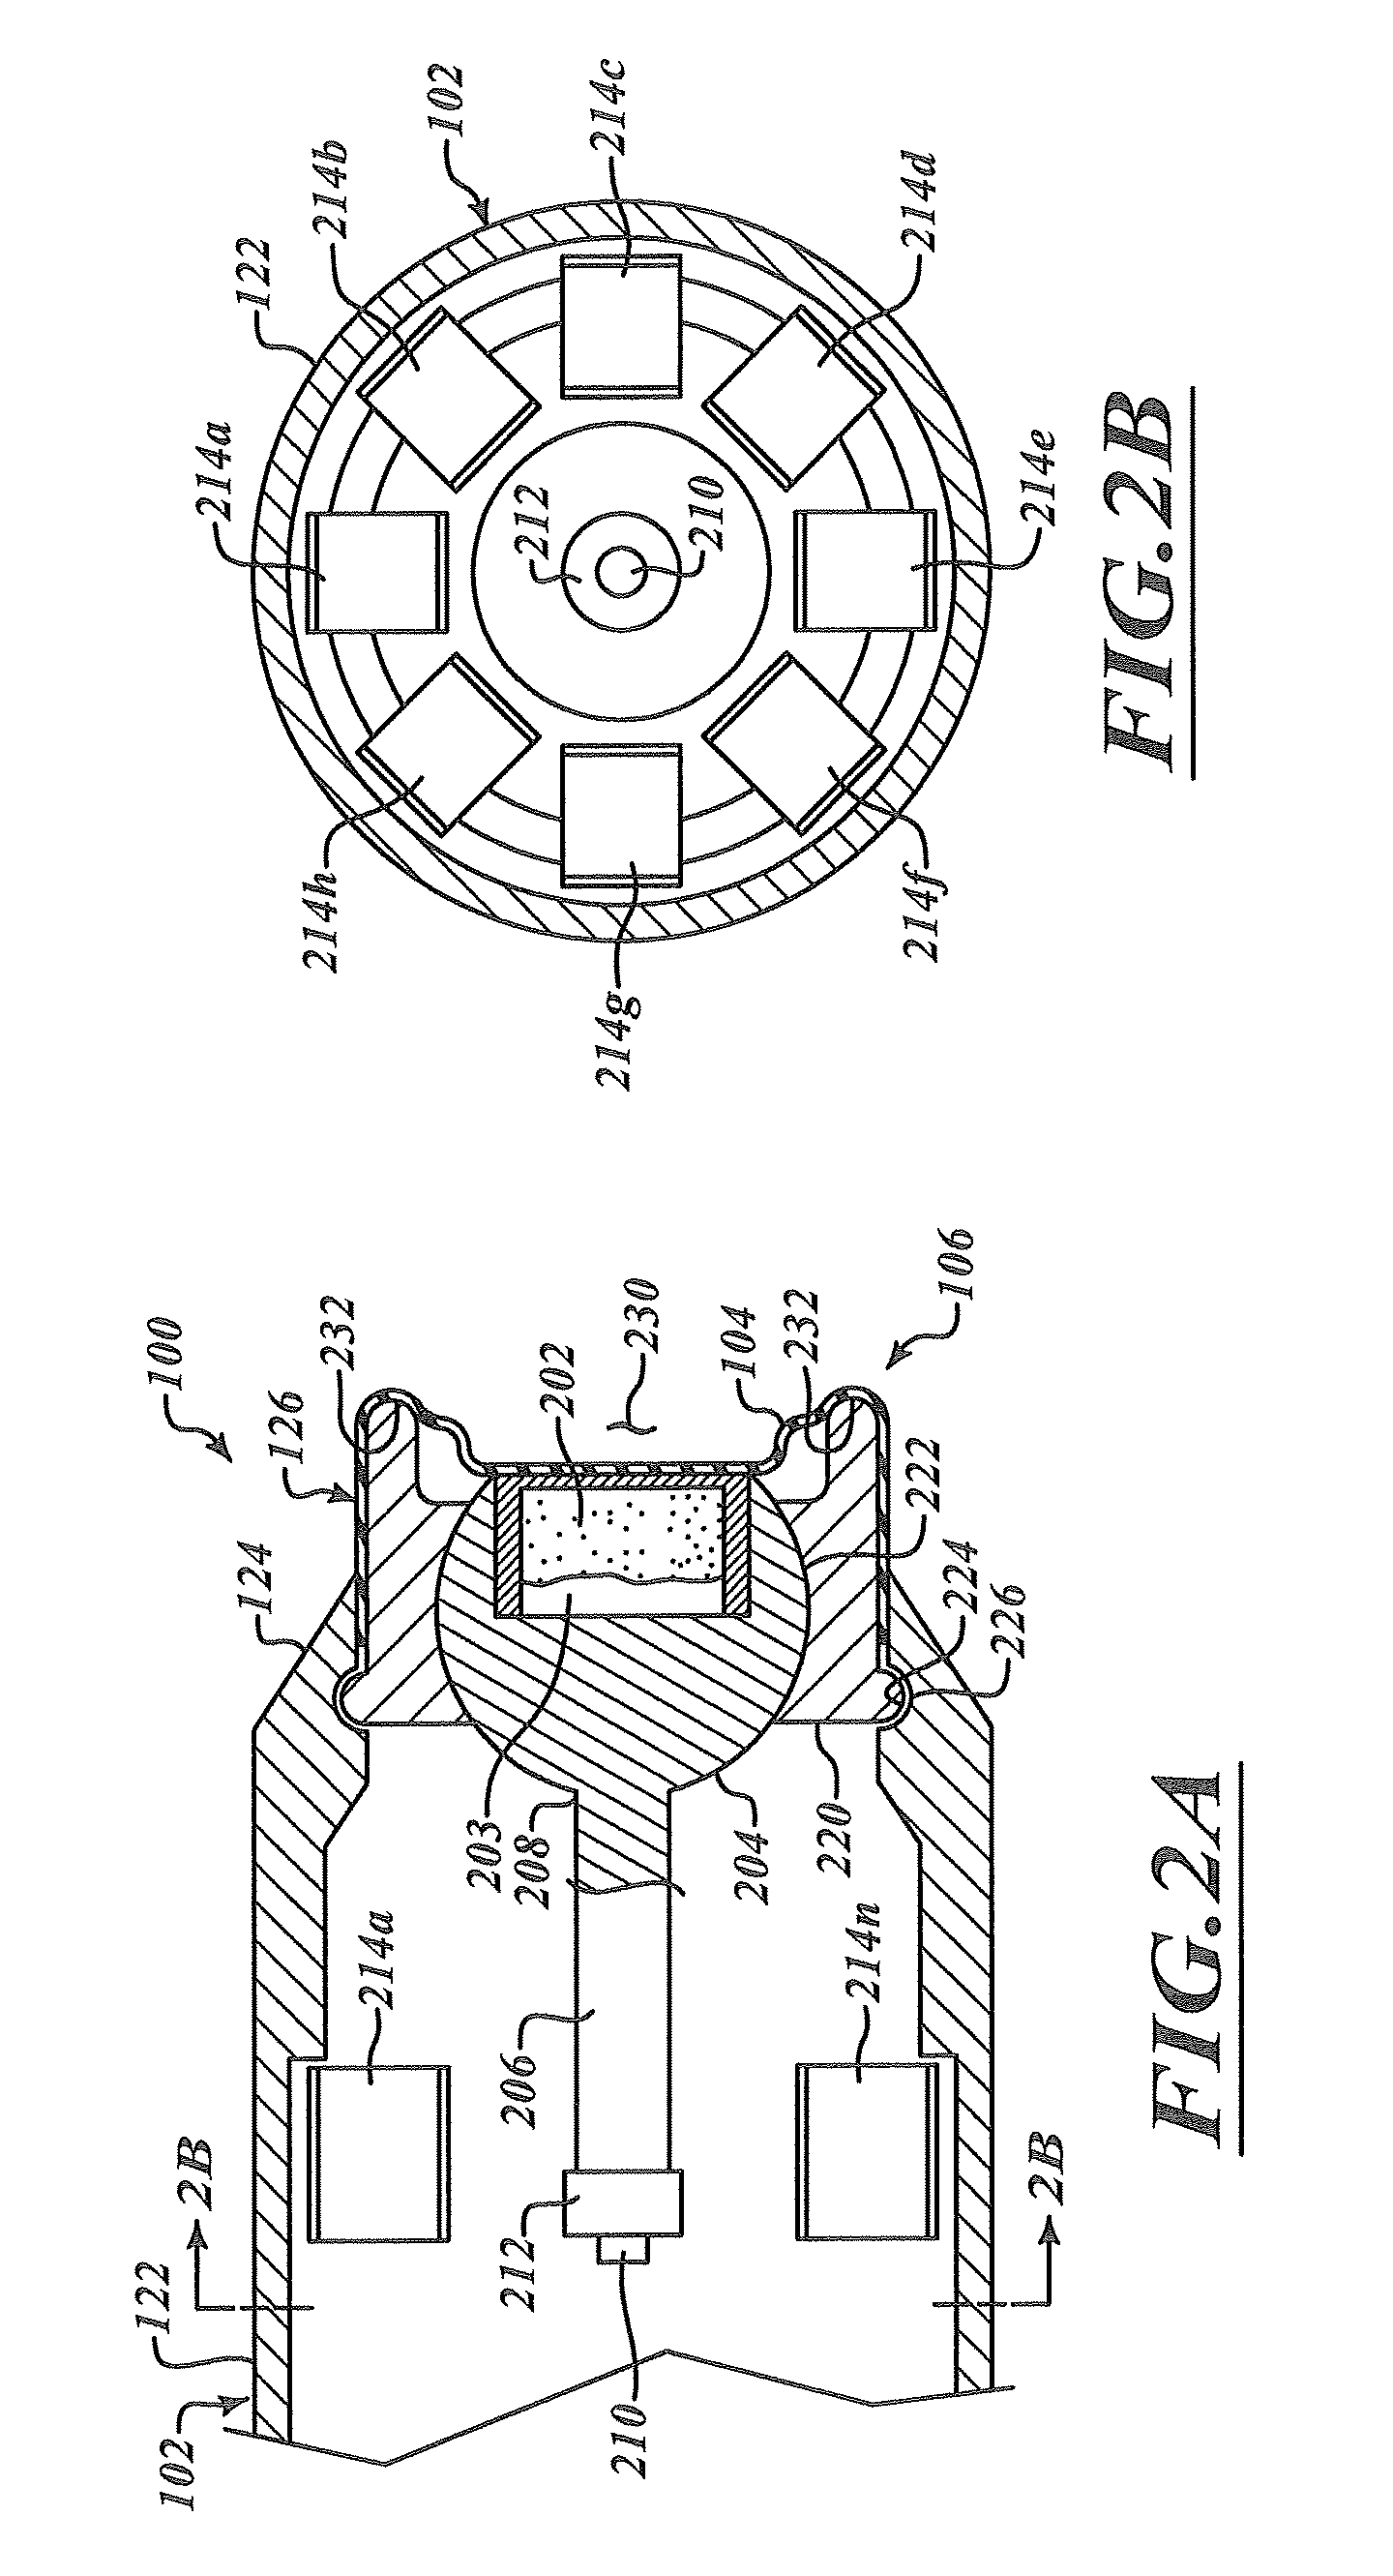 Ocular ultrasound based assessment device and related methods